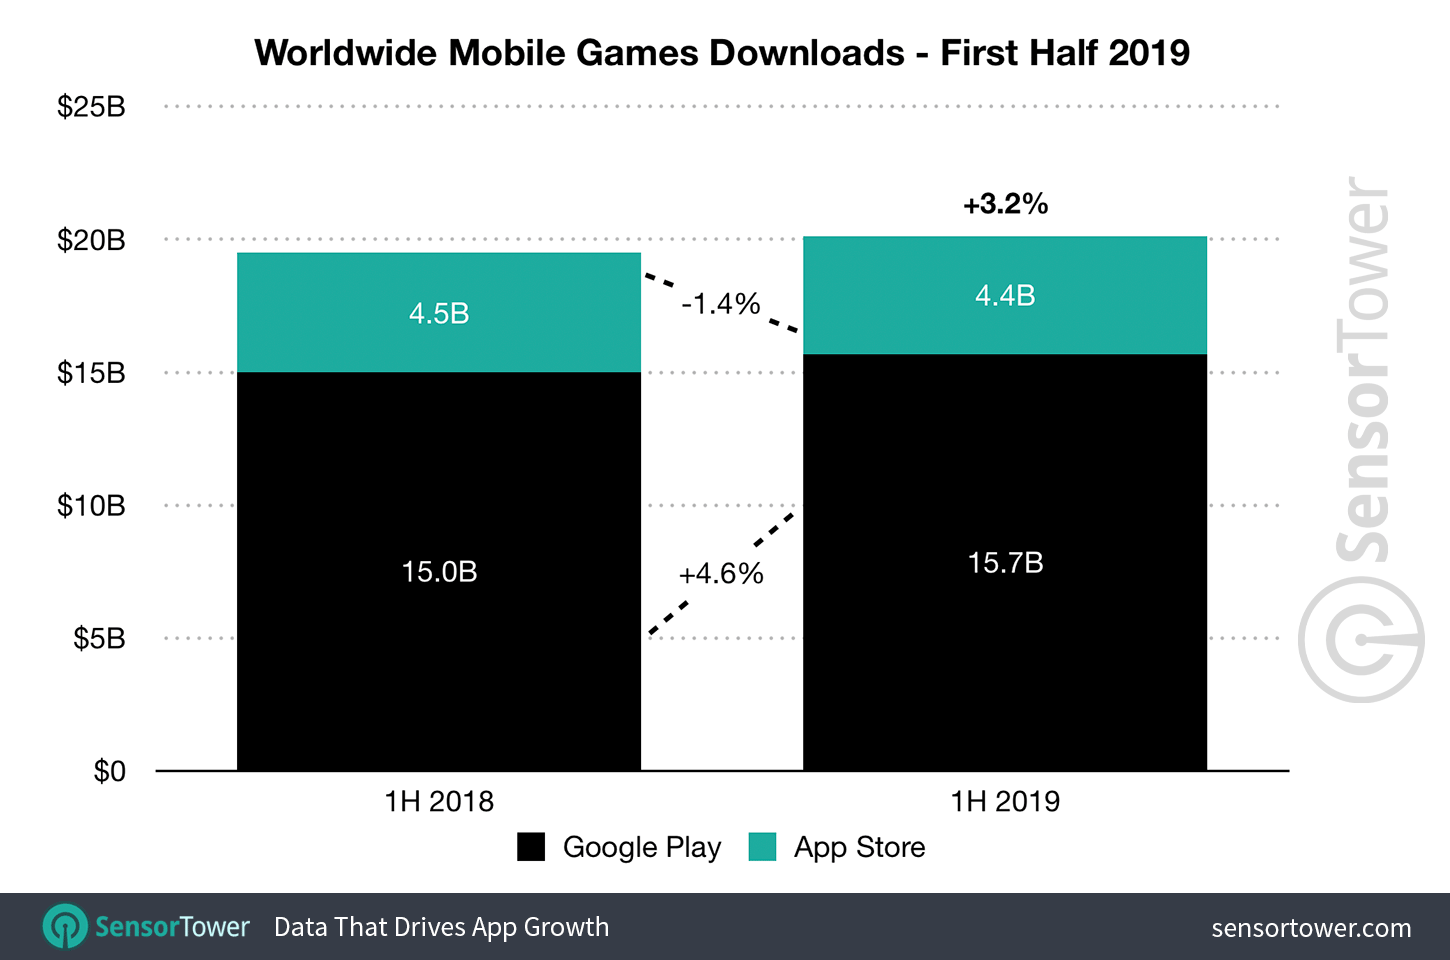 1H 2019 Mobile Game Downloads